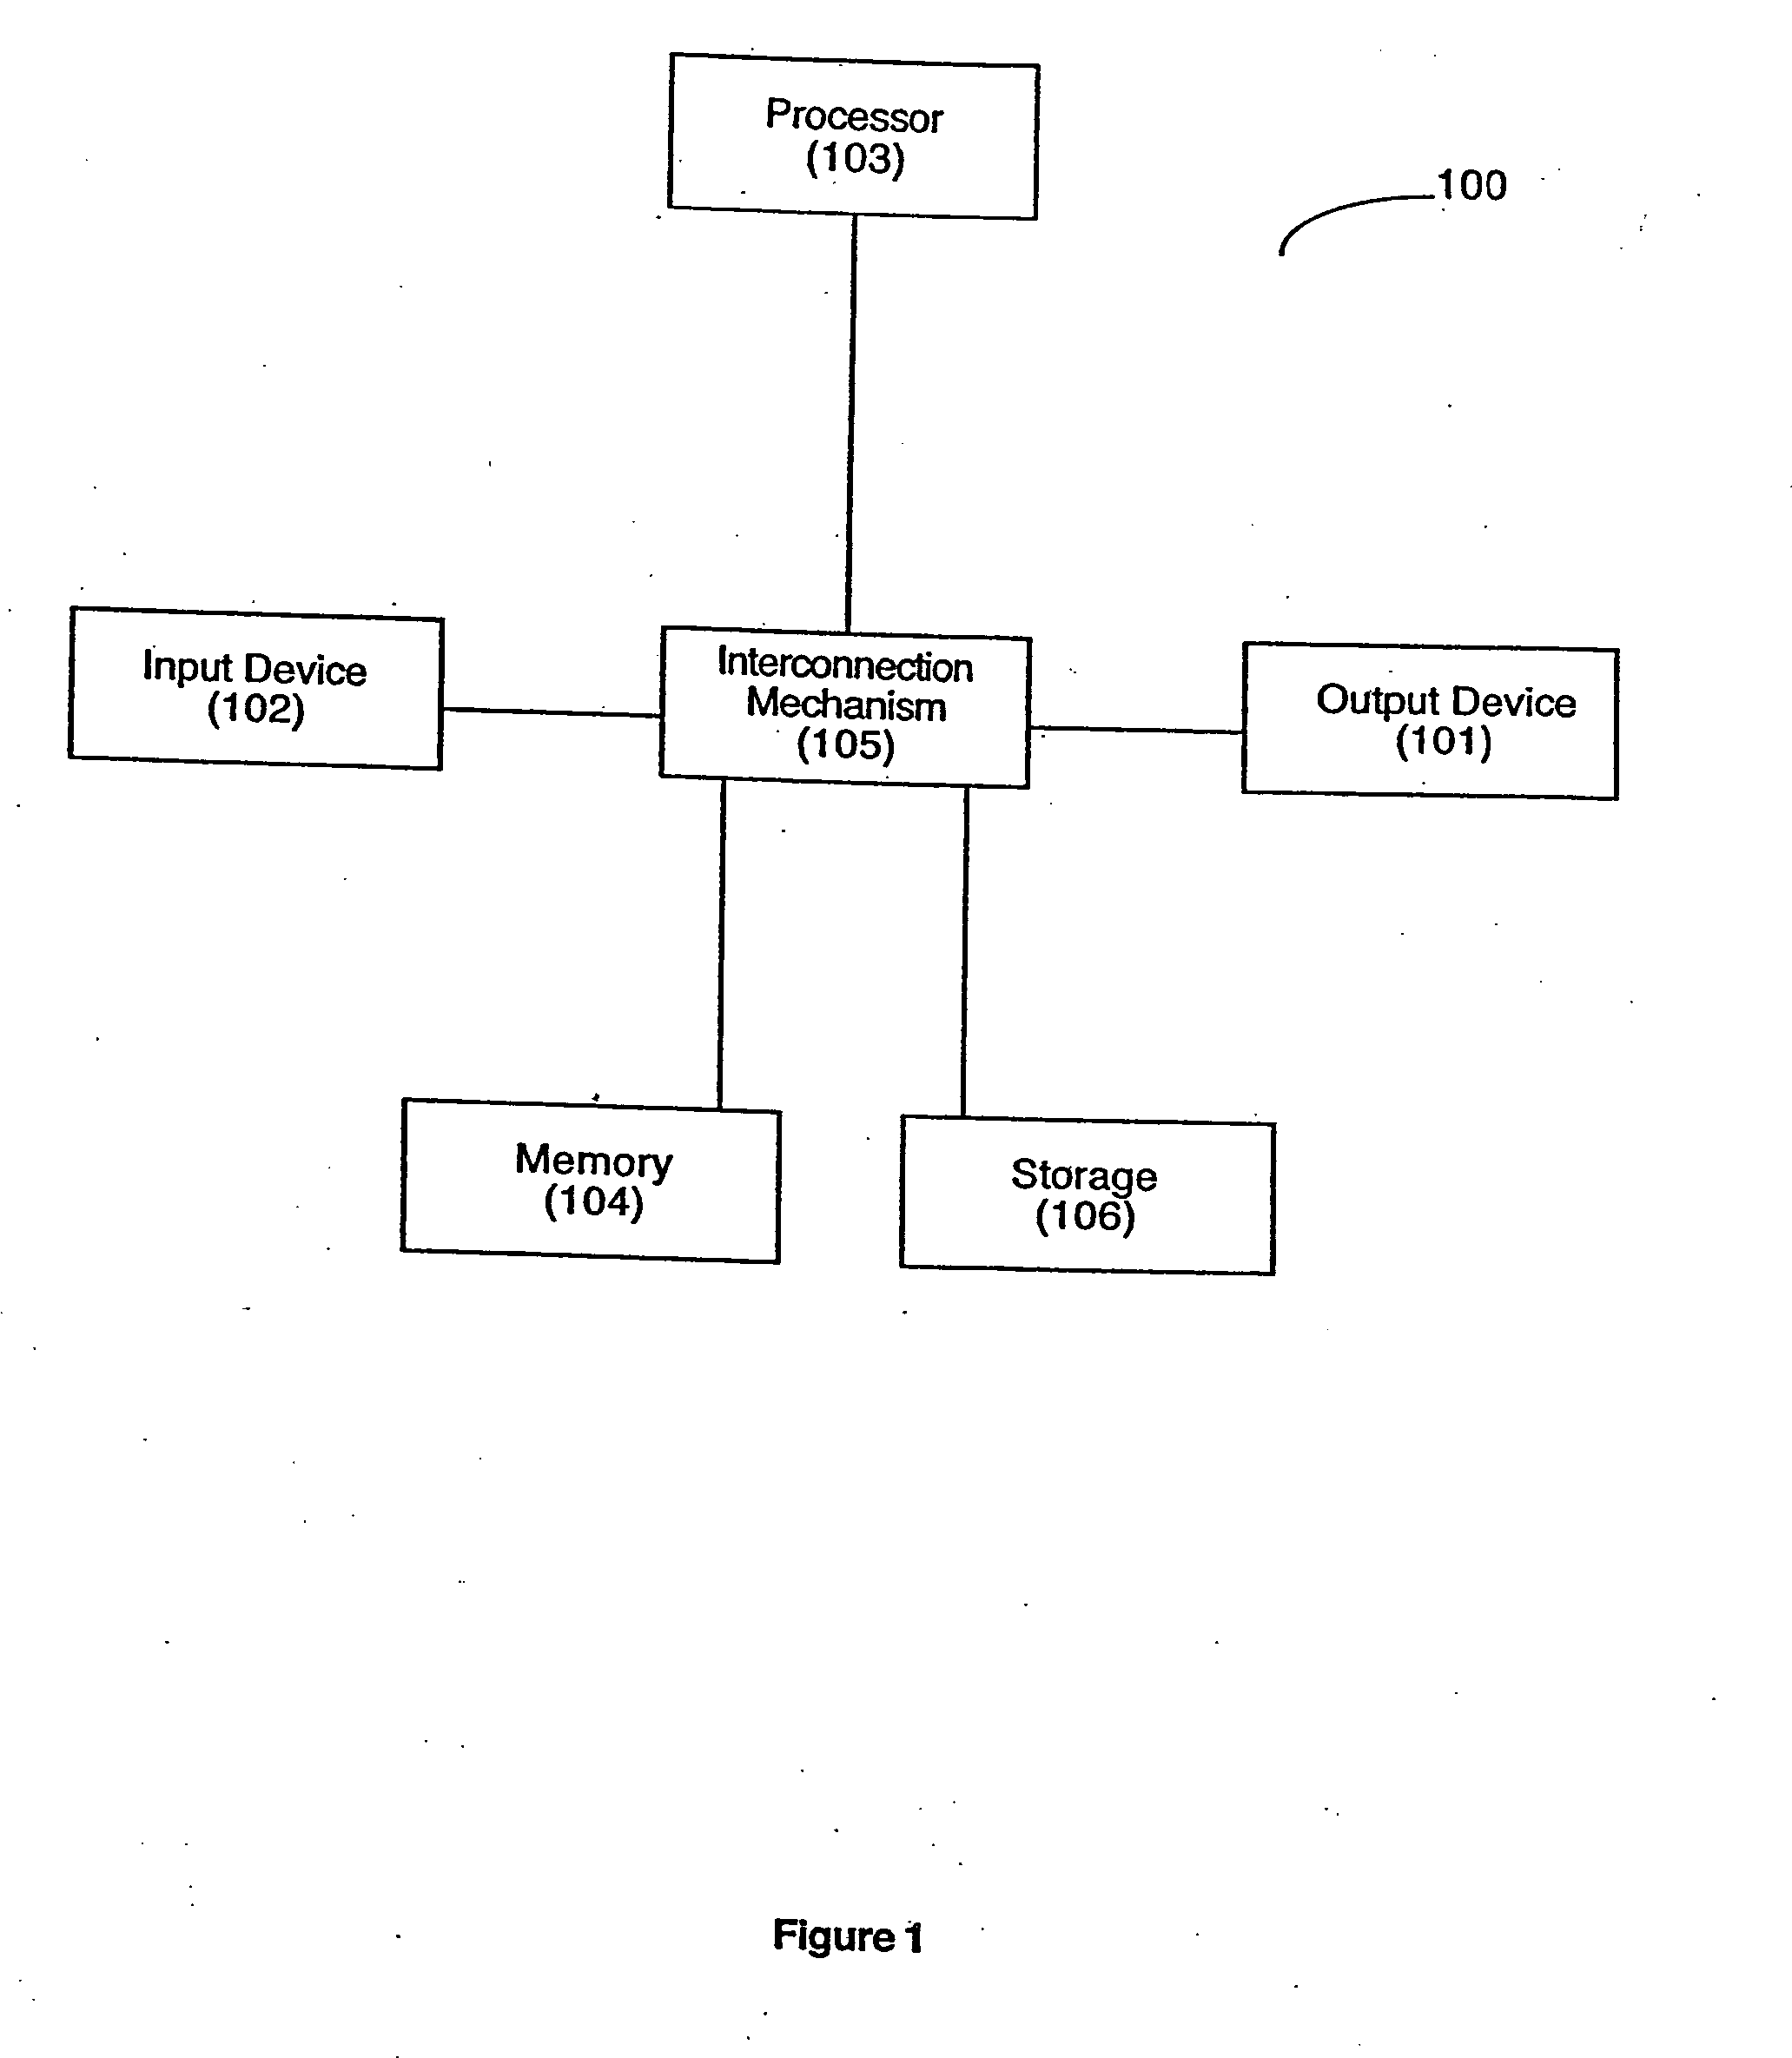 Methods and apparatus for reducing nitrate demands in the reduction of dissolved and/or atmospheric sulfides in wastewater